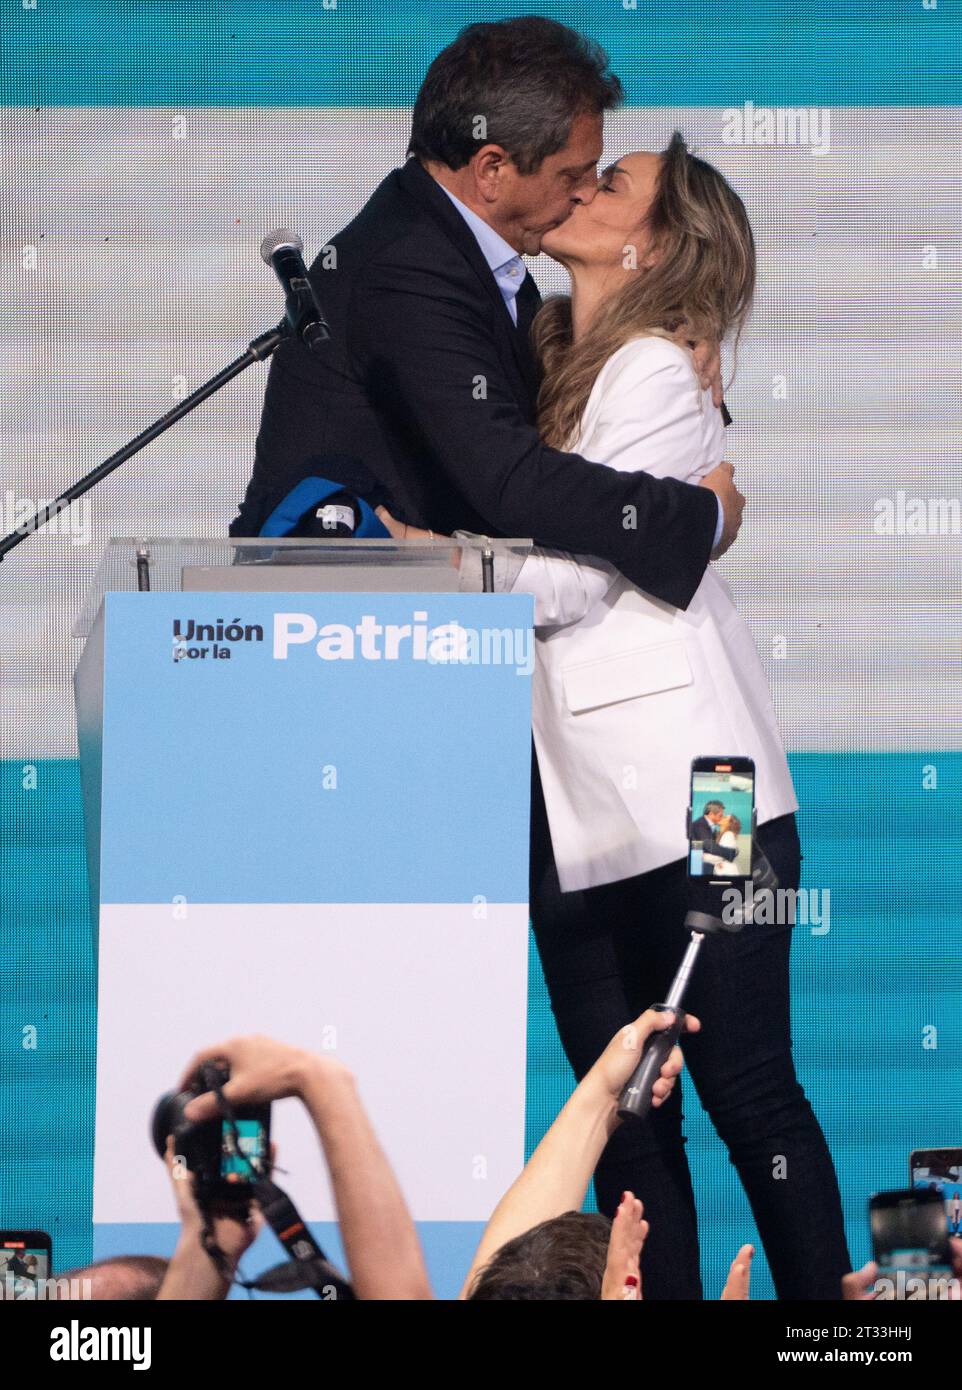 Buenos Aires, Argentina. 22nd Oct, 2023. Sergio Massa, Minister of Economy and presidential candidate of the ruling party, kisses his wife Malena Galmarini at the campaign headquarters after polls closed in the general election in Buenos Aires, Argentina. Massa was in the lead according to initial results and will face ruling party candidate J. Milei in the second round on Nov. 19. Credit: Franco Dergarabedian/dpa/Alamy Live News Stock Photo